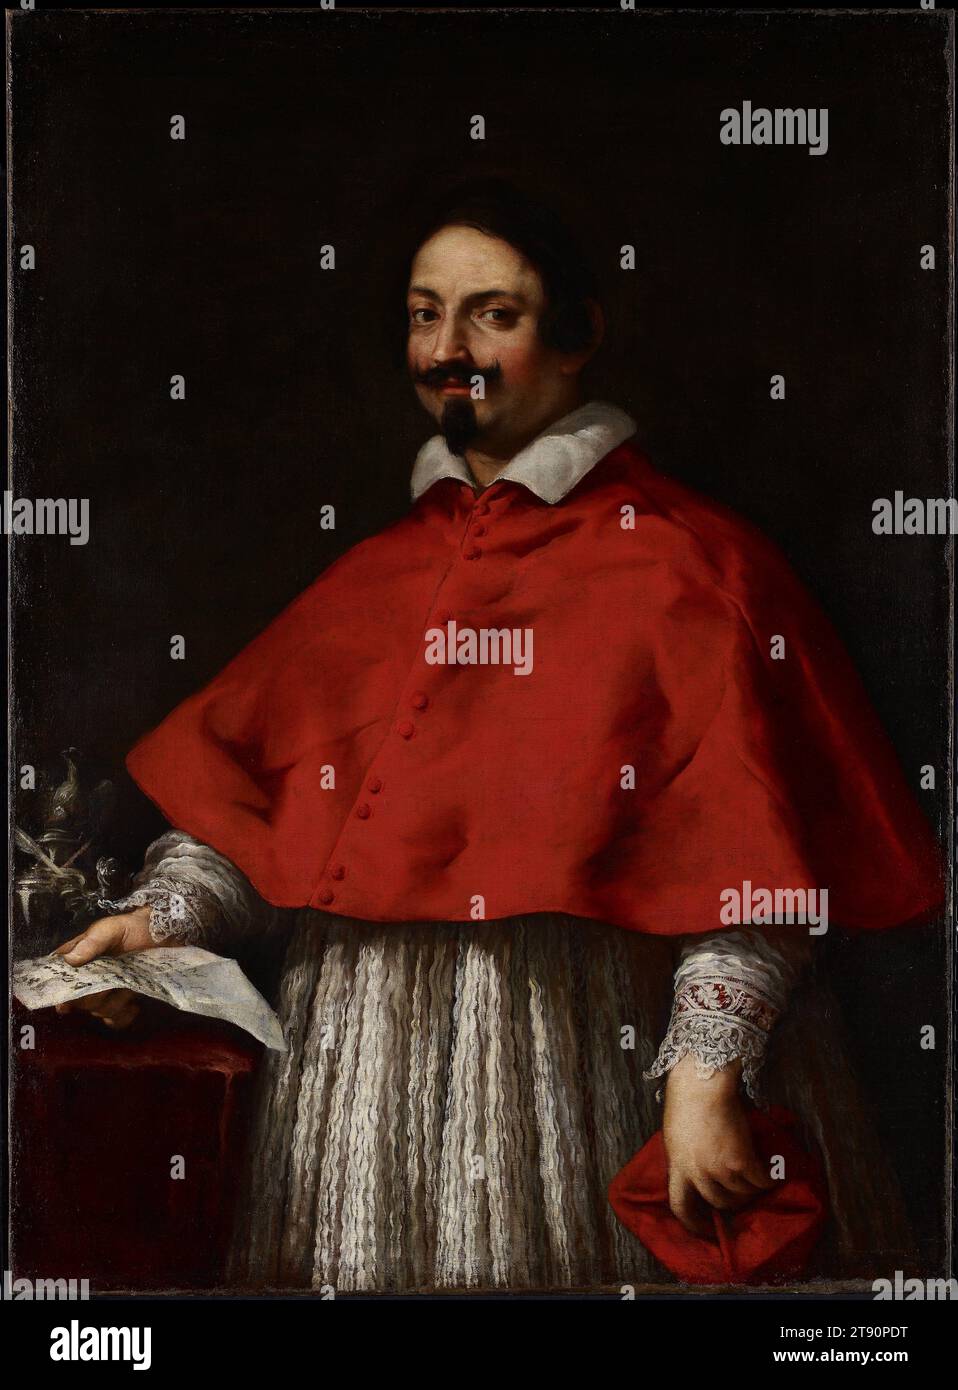 Portrait of Cardinal Pietro Maria Borghese, late 1620s–early 1630s, Pietro da Cortona (Pietro Berrettini), Italian (Tuscany), Italian (Tuscany), 1596–1669, 53 x 39 in. (134.62 x 99.06 cm) (canvas)63 1/4 x 49 1/2 x 3 in. (160.66 x 125.73 x 7.62 cm) (outer frame), Oil on canvas, Italy, 17th century, This inquisitive-looking cardinal, with his intelligent gaze, plump waistline, fashionable goatee and moustache, and large ear, is Pietro Maria Borghese (1599–1642), grandnephew of Pope Paul V. The elaborate silver inkwell carries his family’s coat of arms, an eagle over a dragon. Stock Photo